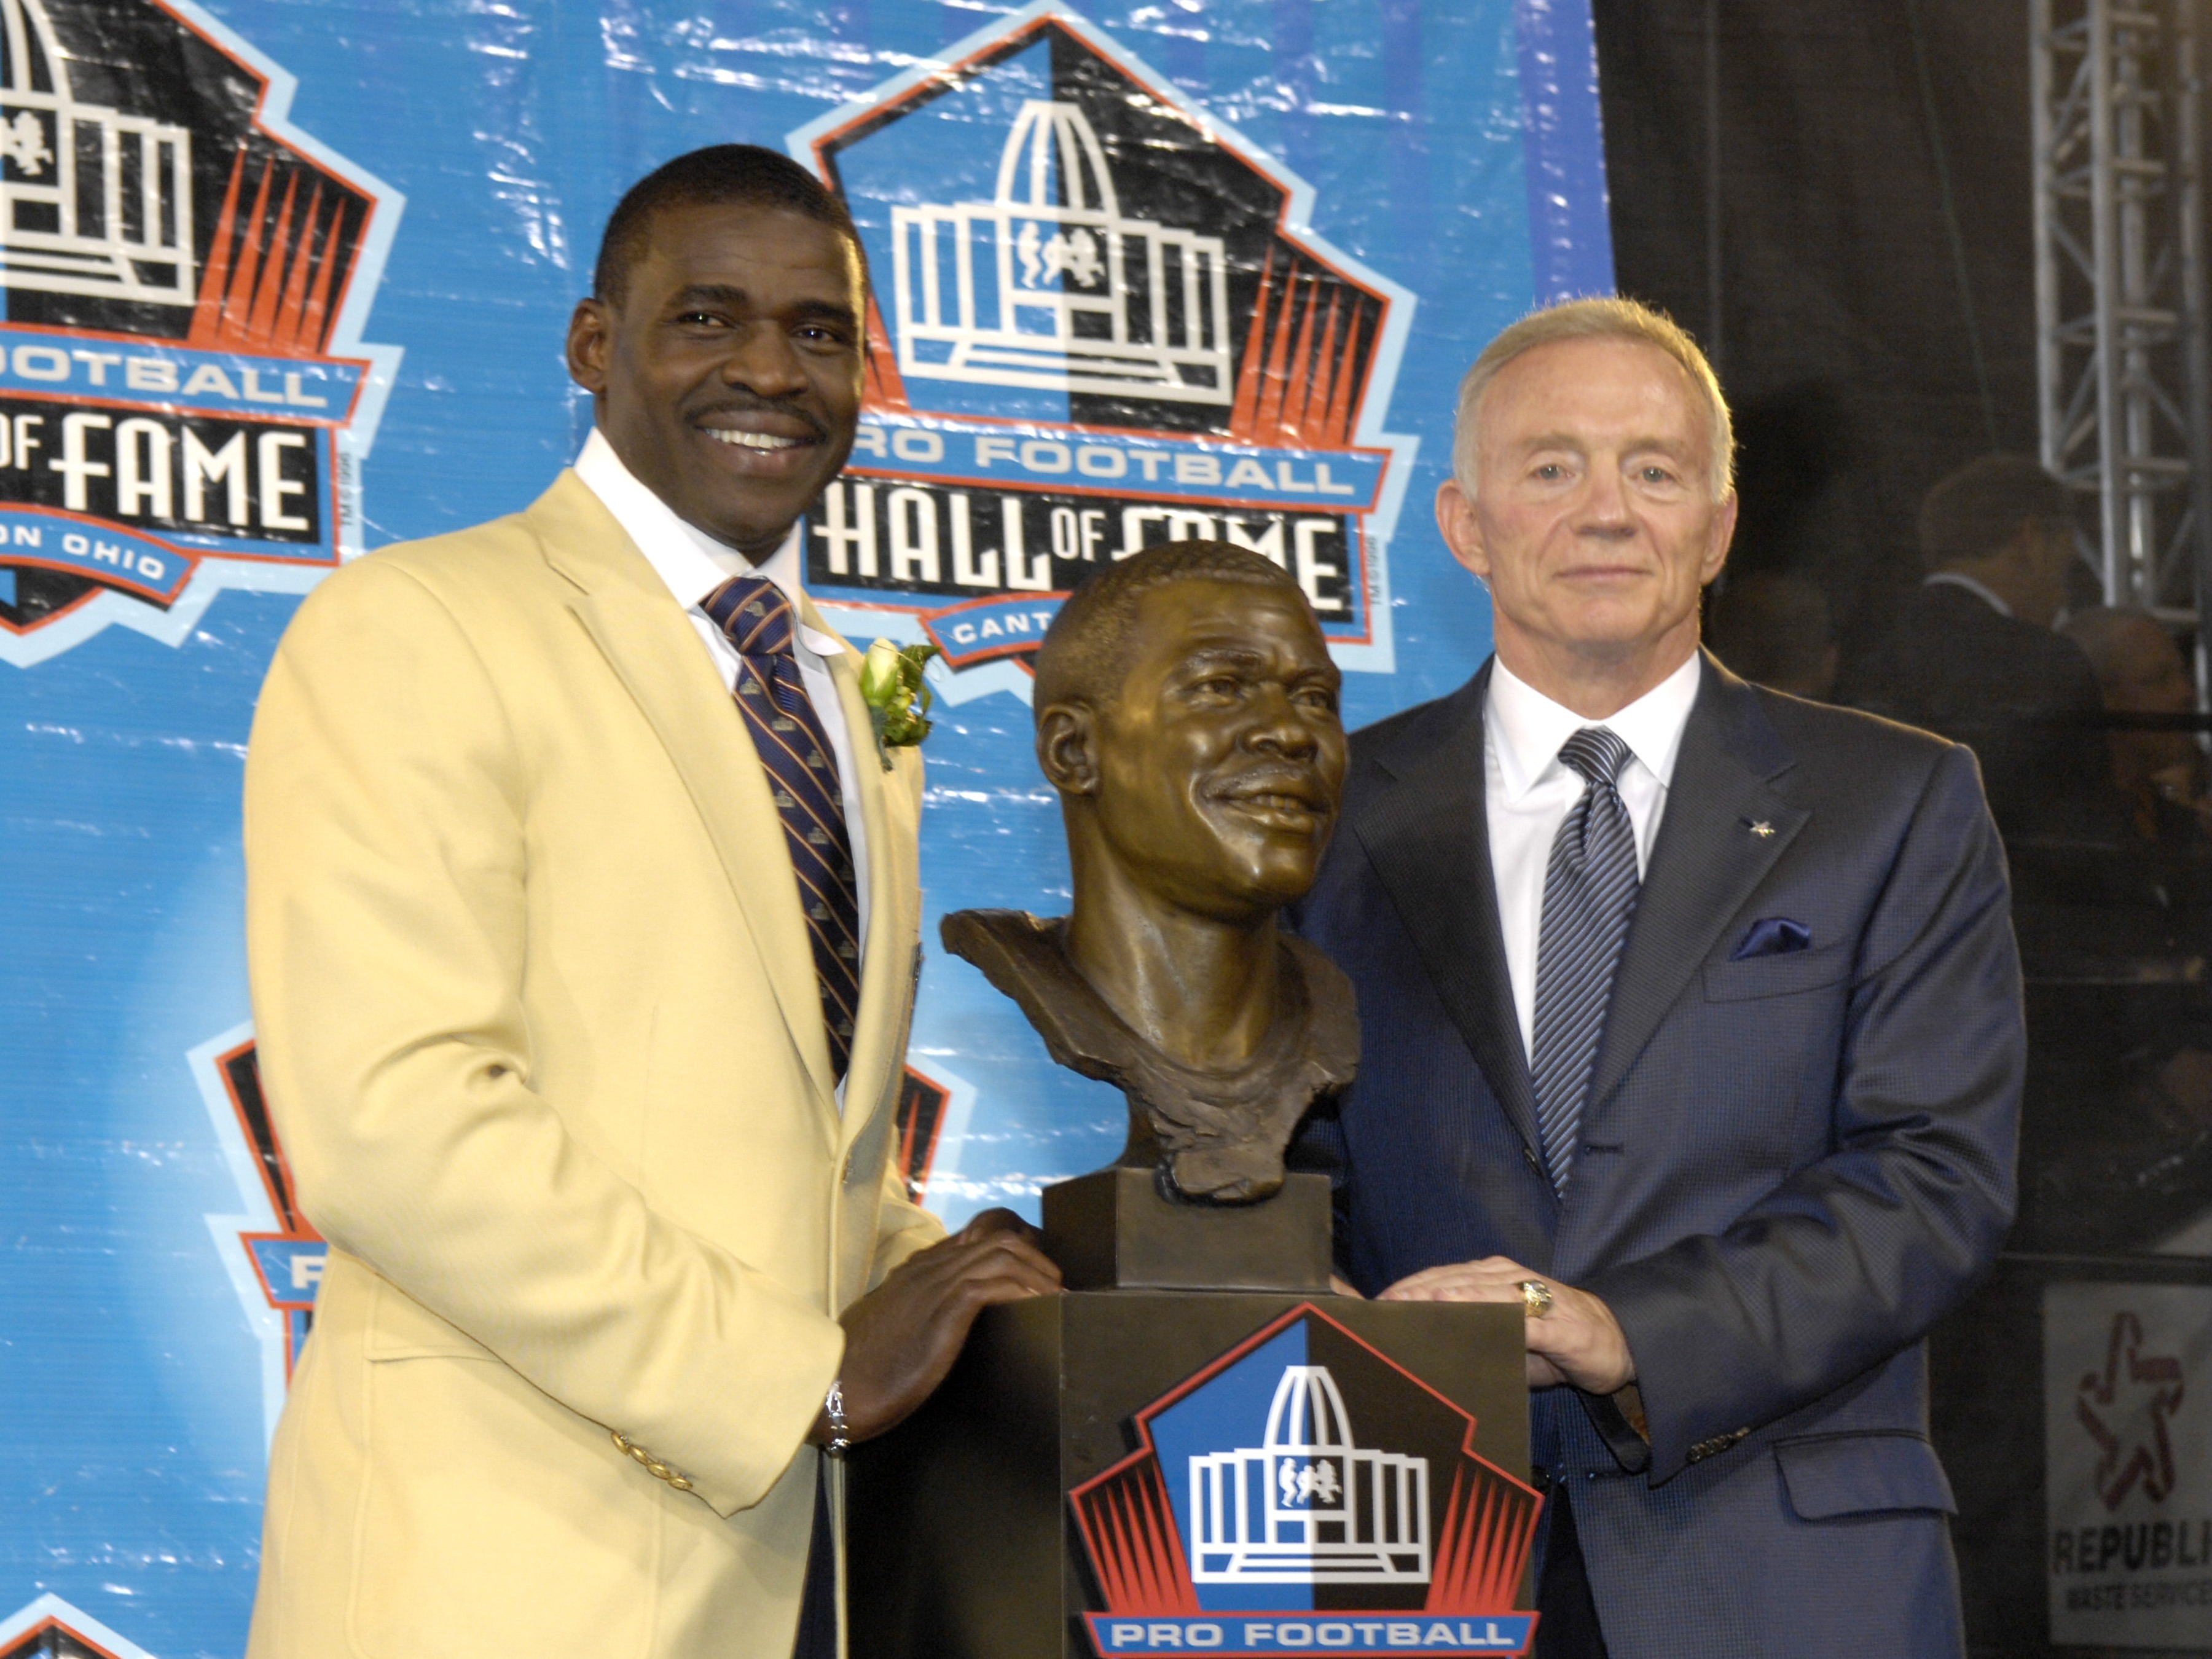 Dallas Cowboys owner Jerry Jones and Michael Irvin